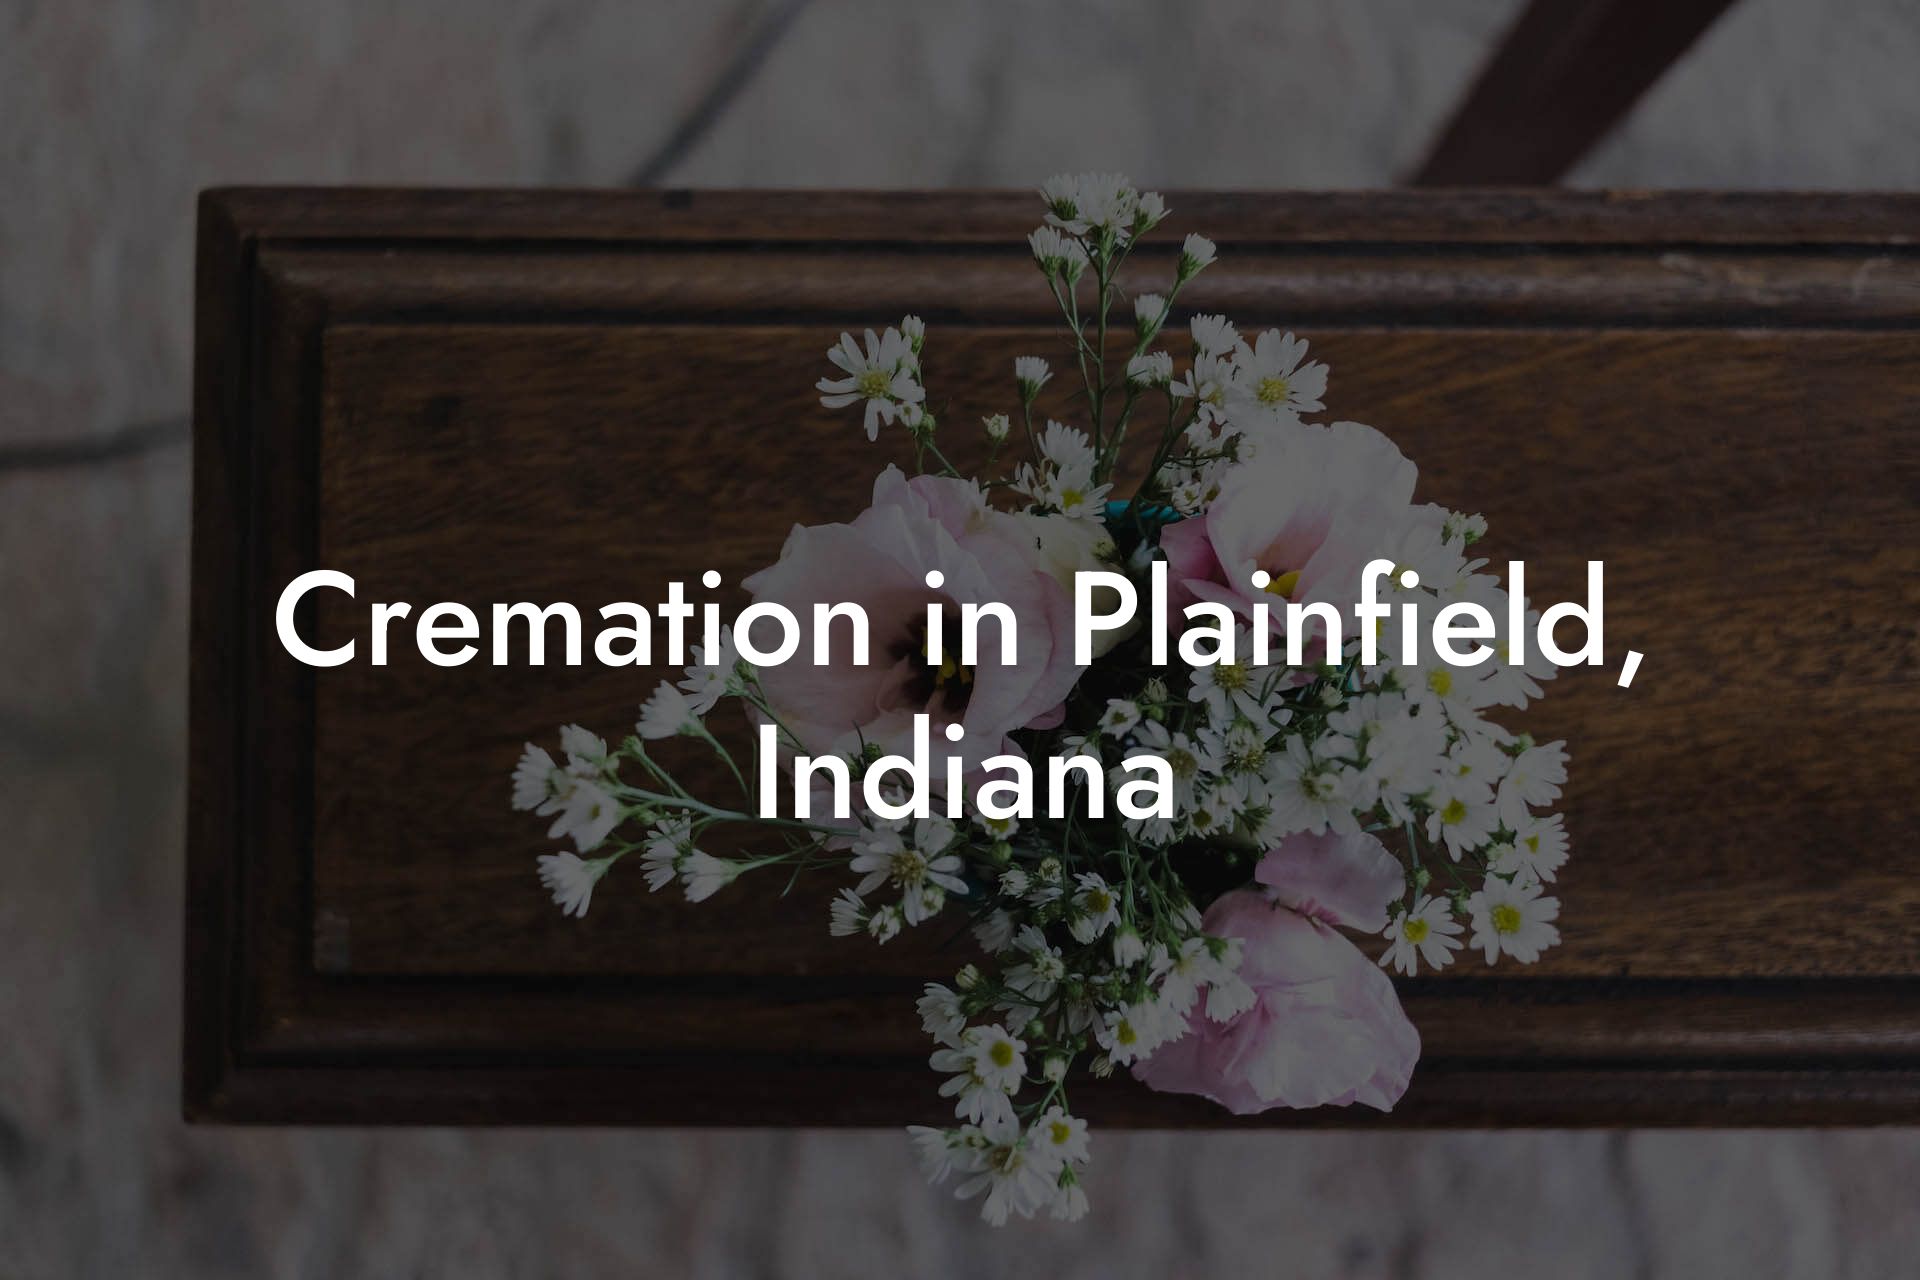 Cremation in Plainfield, Indiana